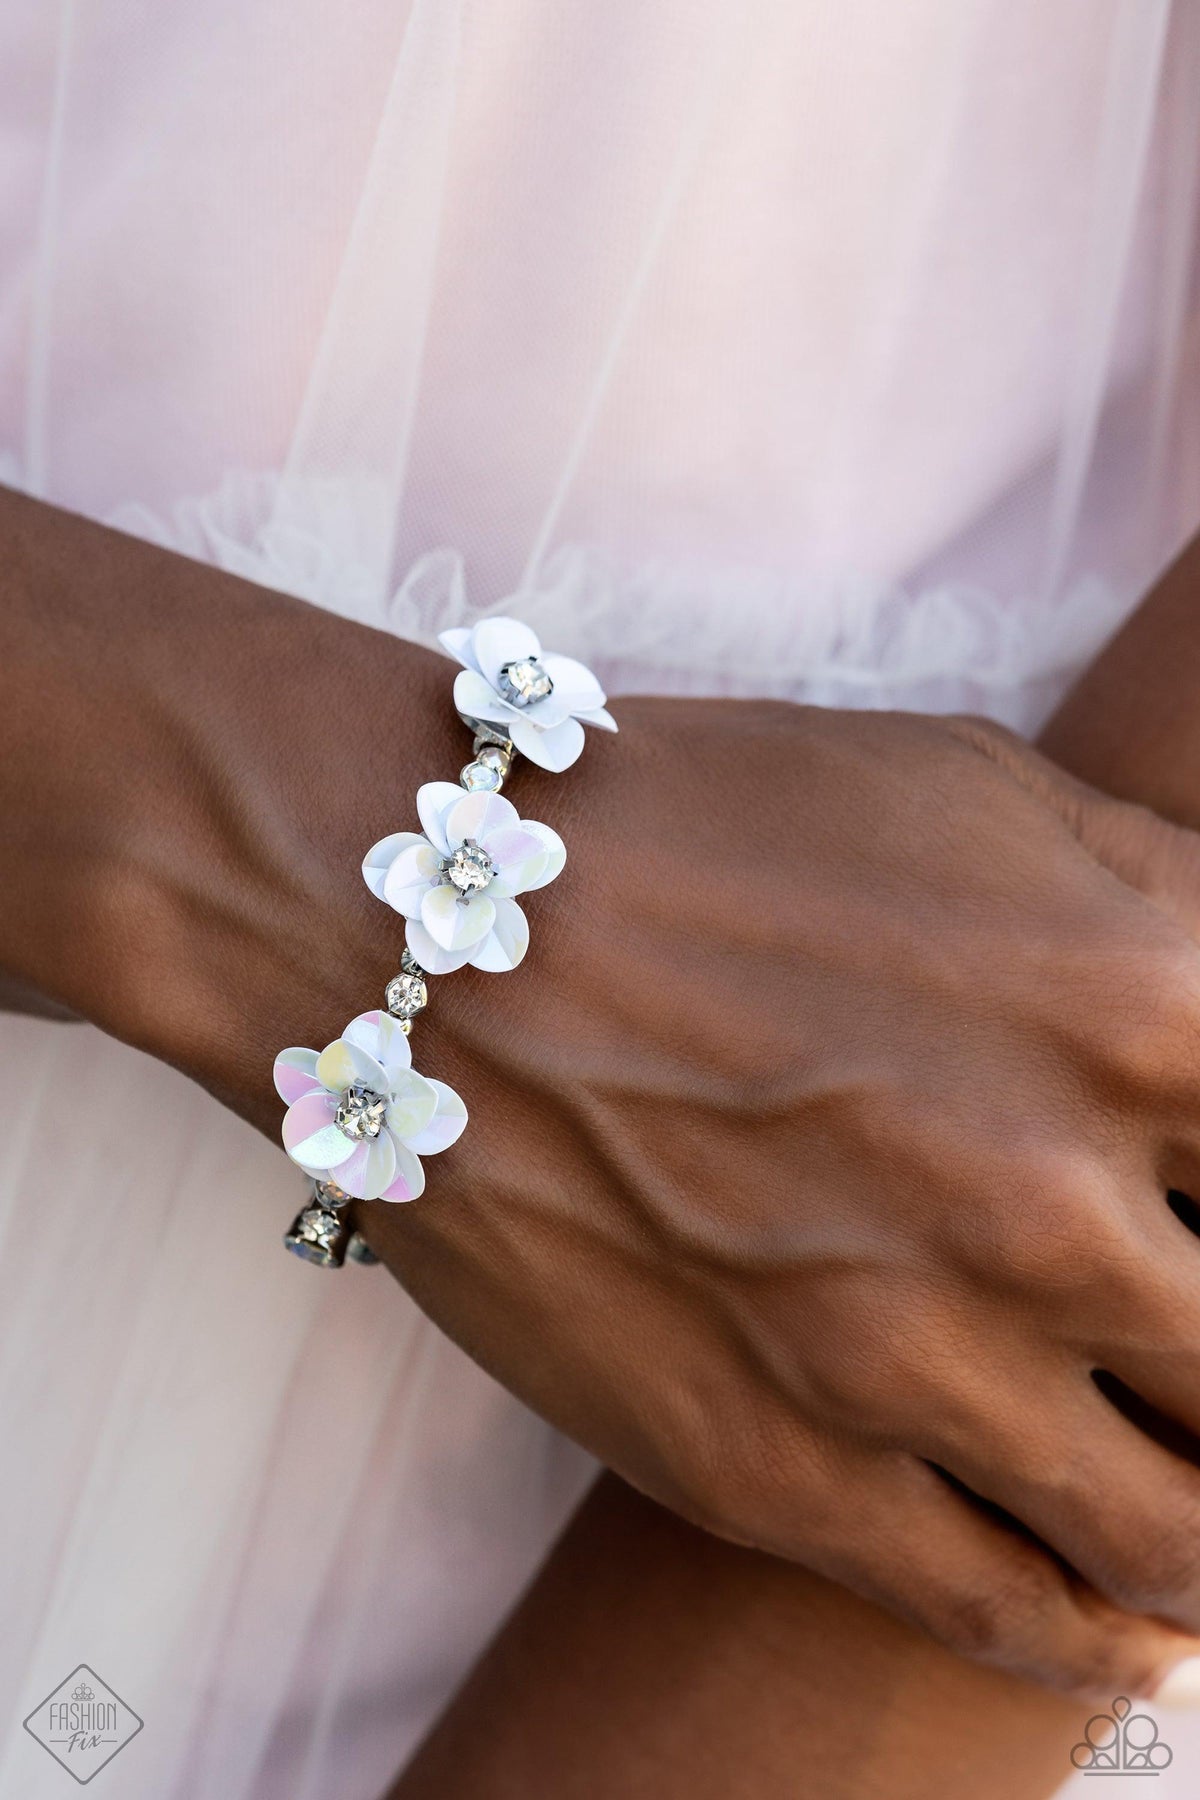 Endlessly Ethereal Multi Floral Coil Bracelet - Paparazzi Accessories-on model - CarasShop.com - $5 Jewelry by Cara Jewels